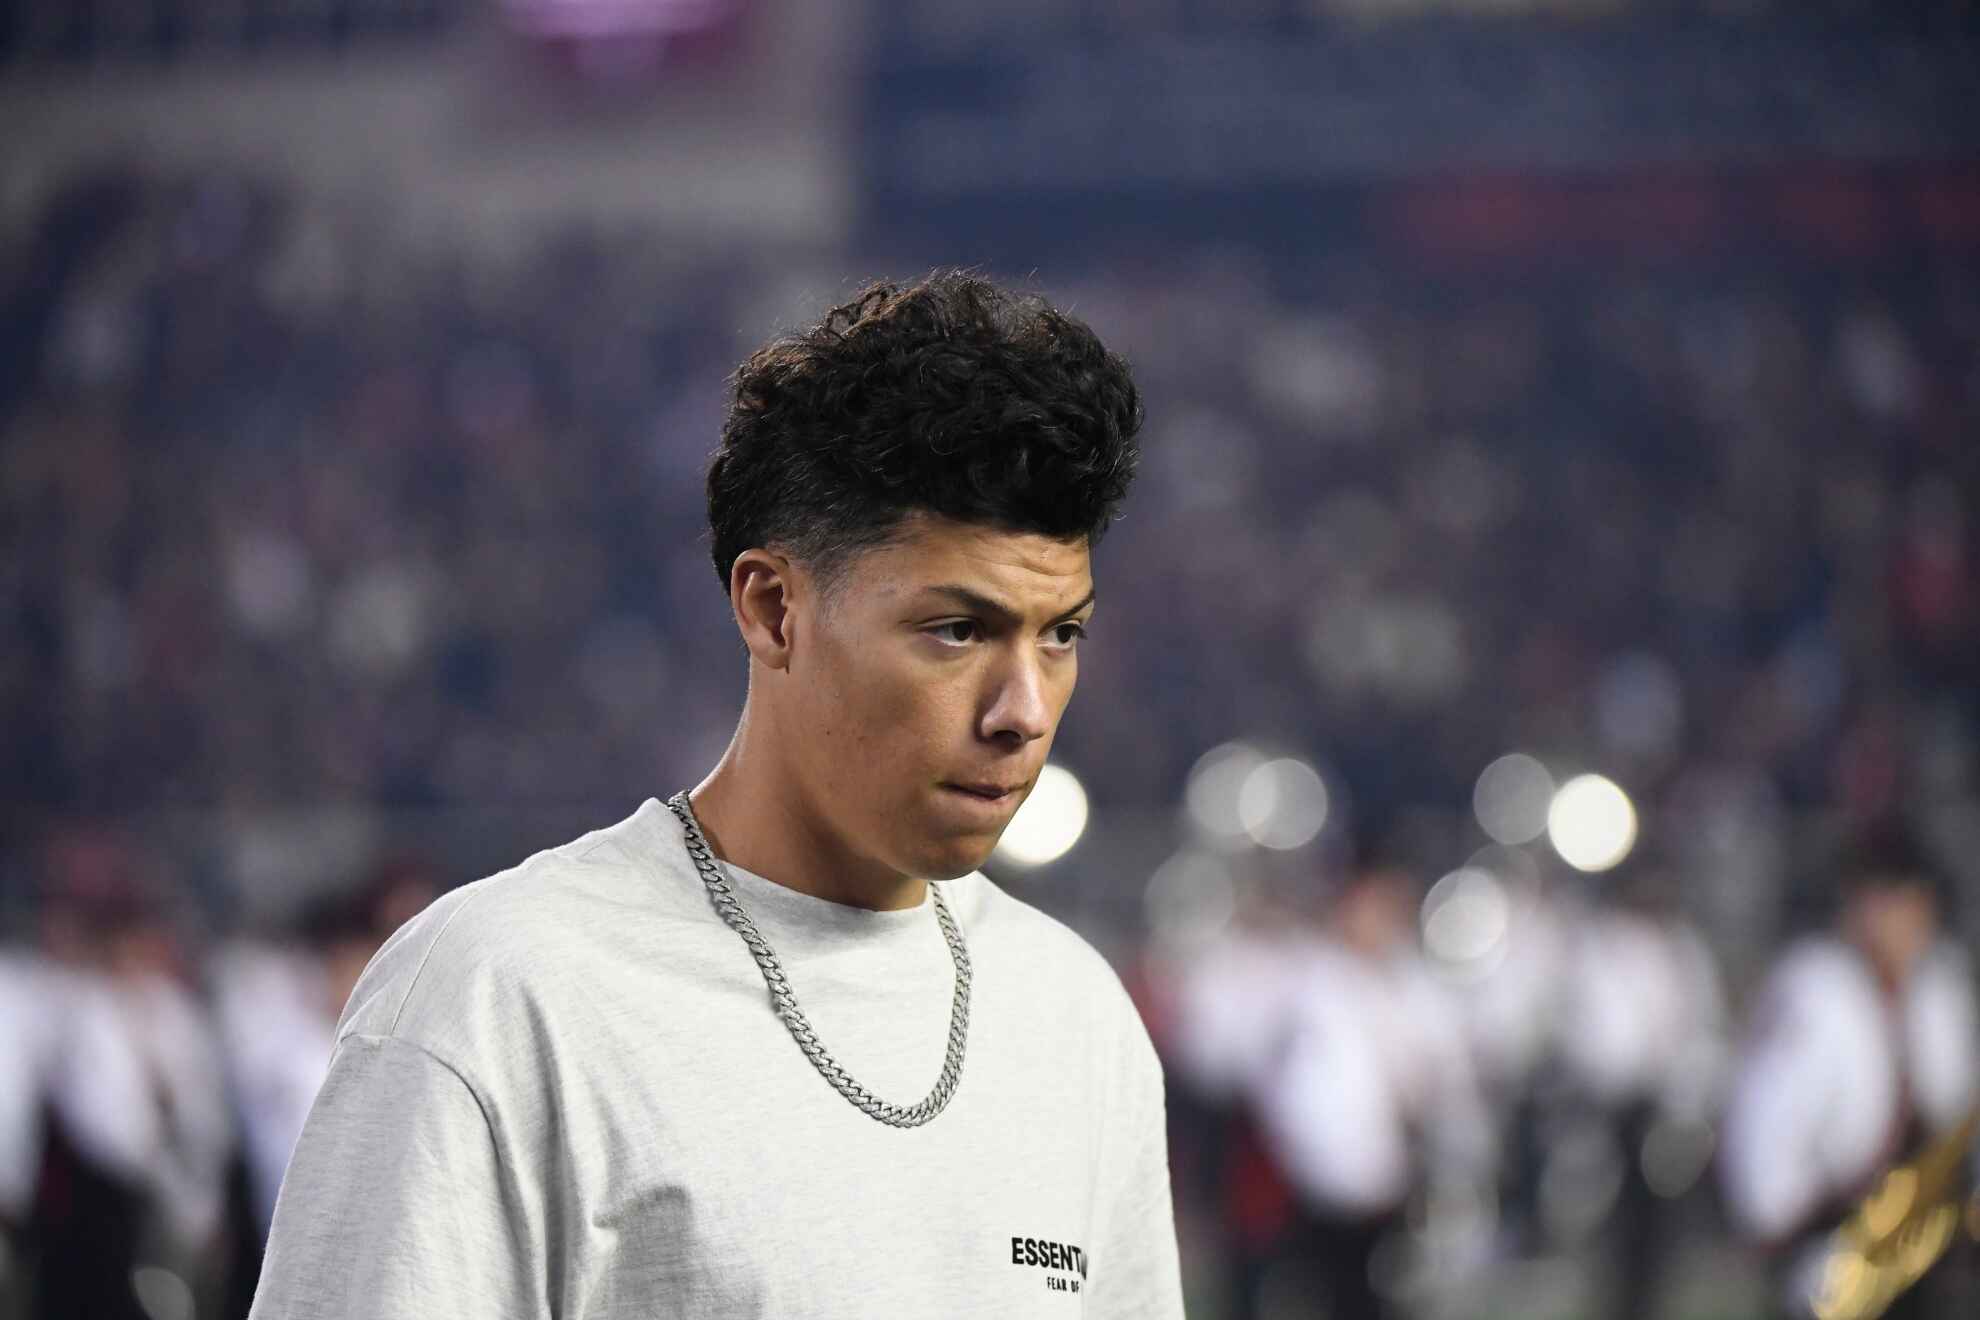 Jackson Mahomes’ Alleged Victim Not Cooperating, Resulting In Move To Drop 3 Charges